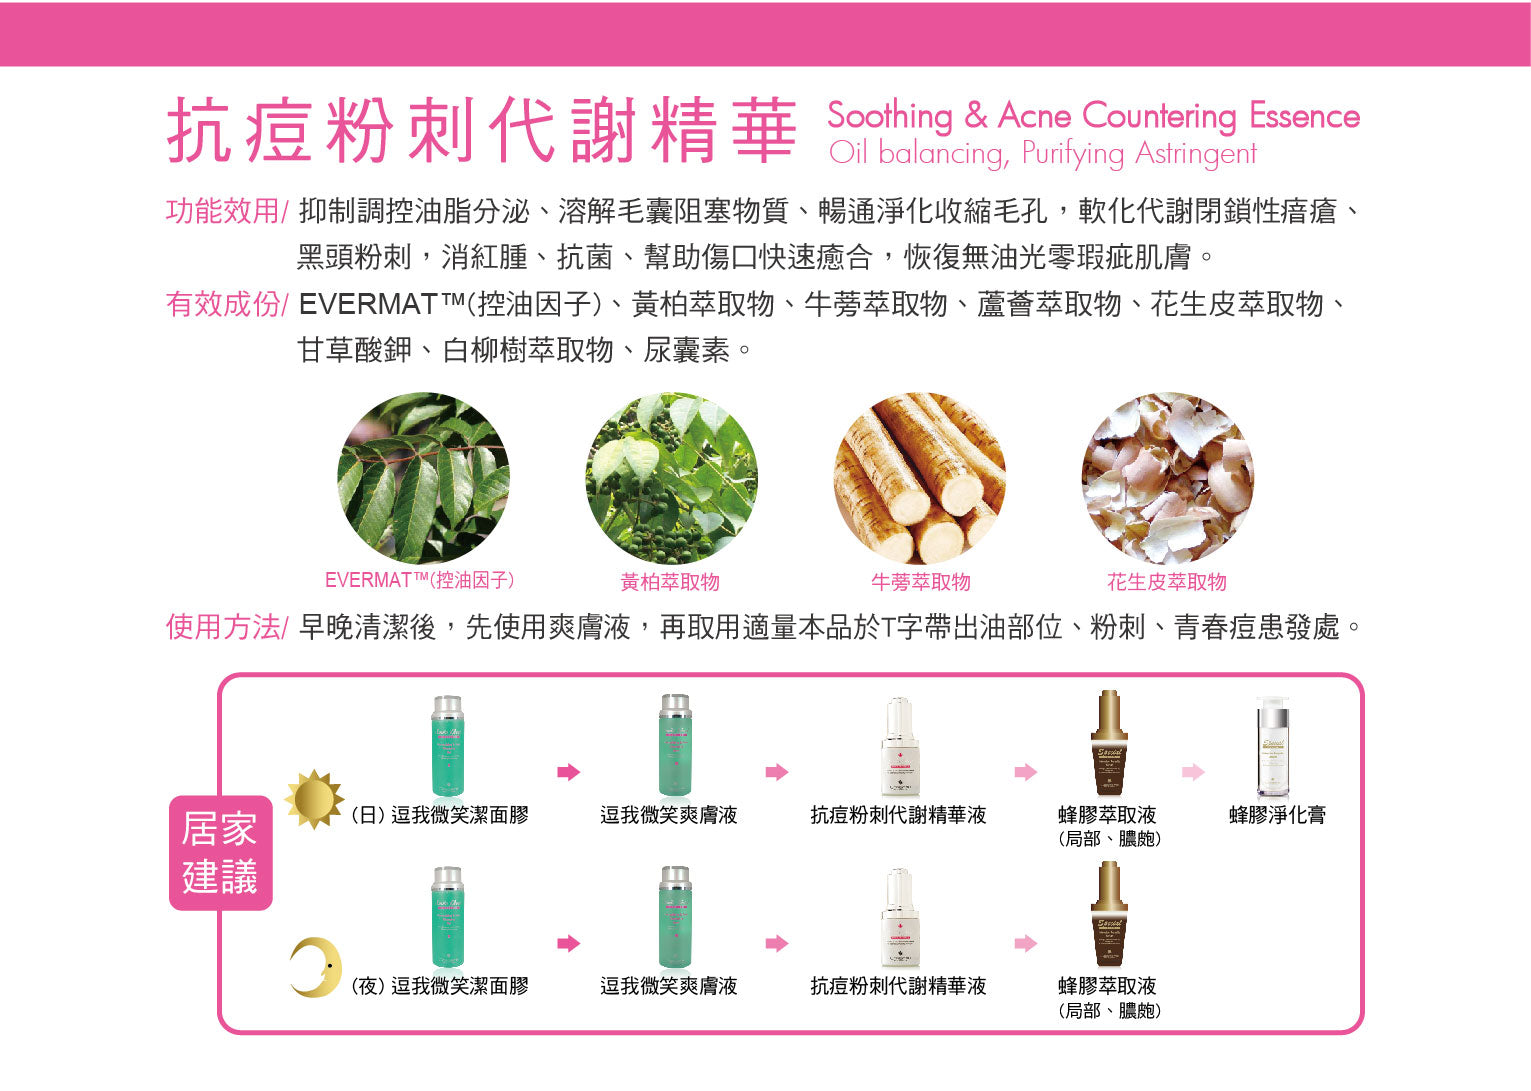 【COSGENE】Anti-Acne Countering Essence Soothing & Acne Countering Essence